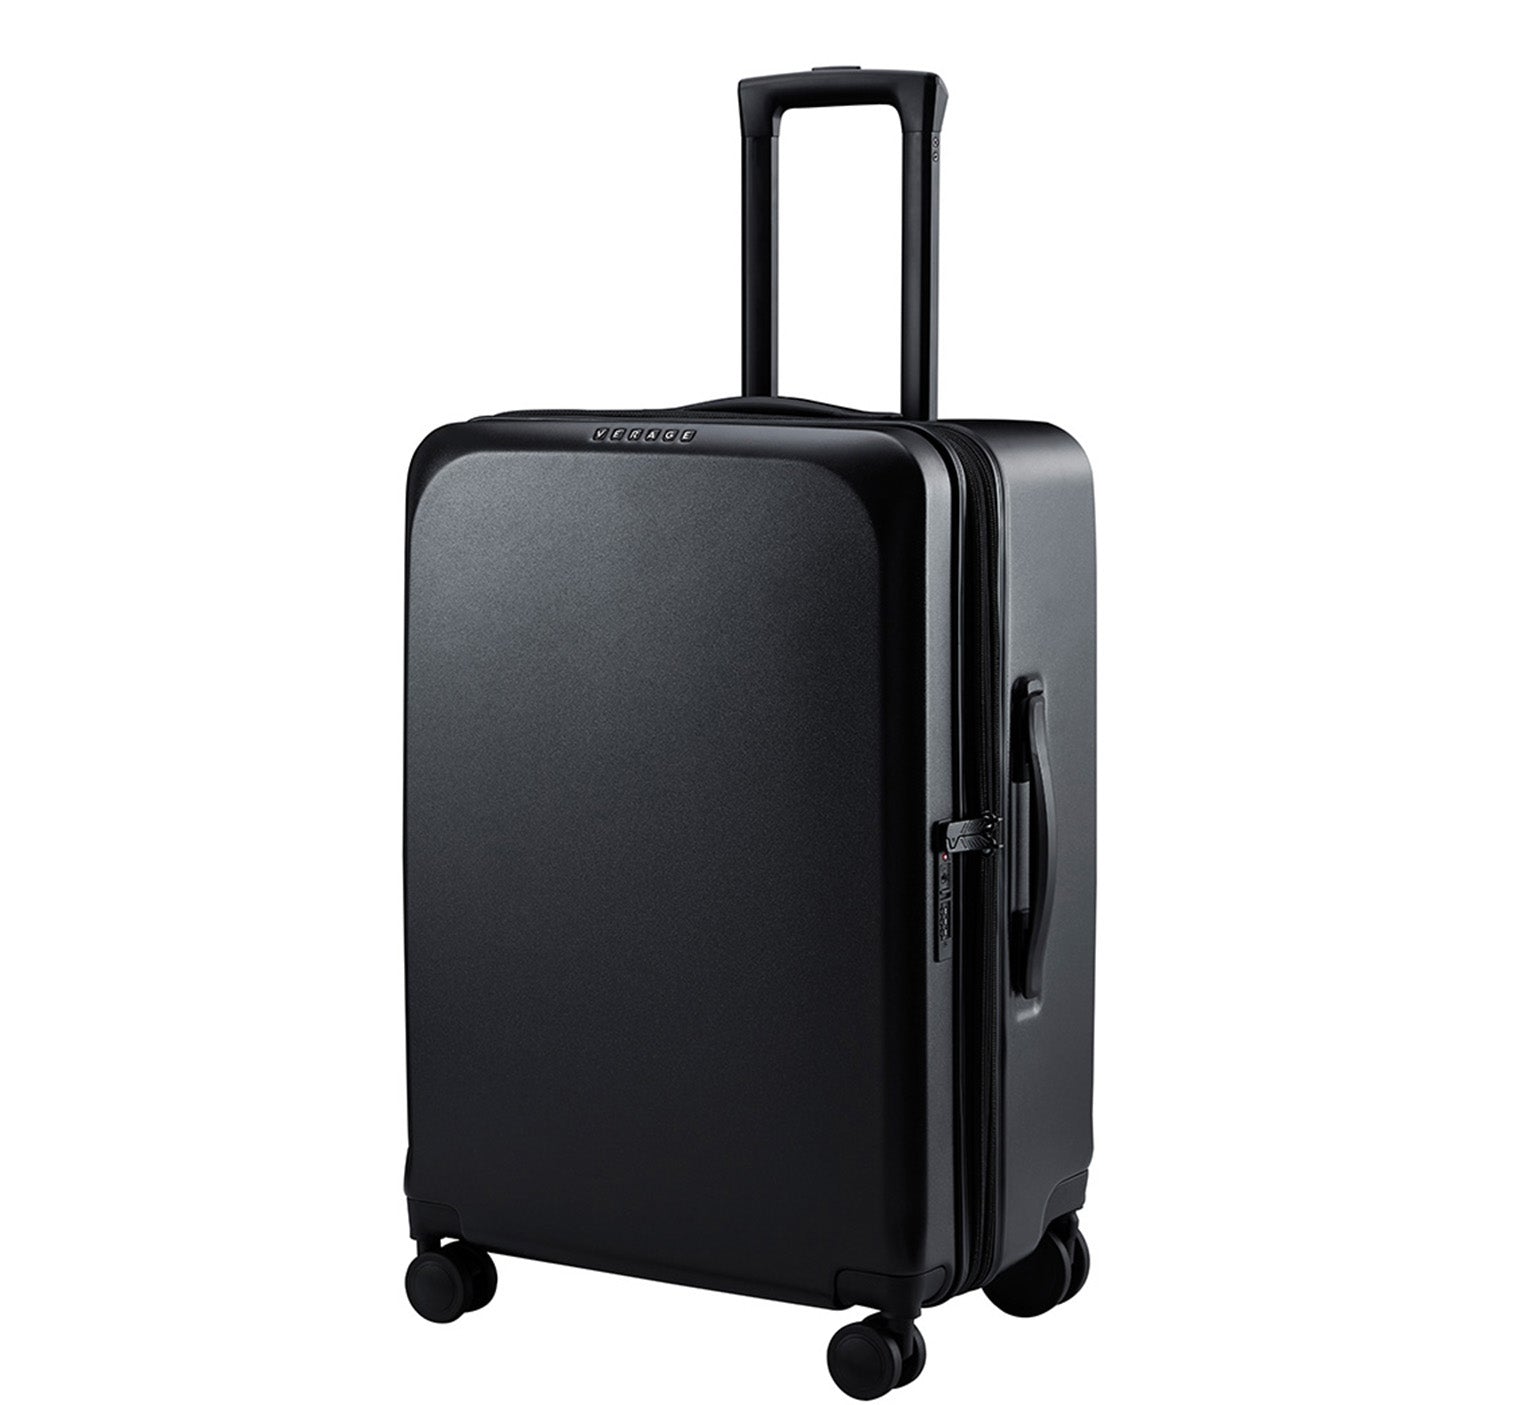 Verage Underseat Carry On Luggage with Spinner Wheels Suitcase Softside  Lightweight Travel Bag Suitcase for Airlines,Men Women, Pilots and Crew -  Walmart.com